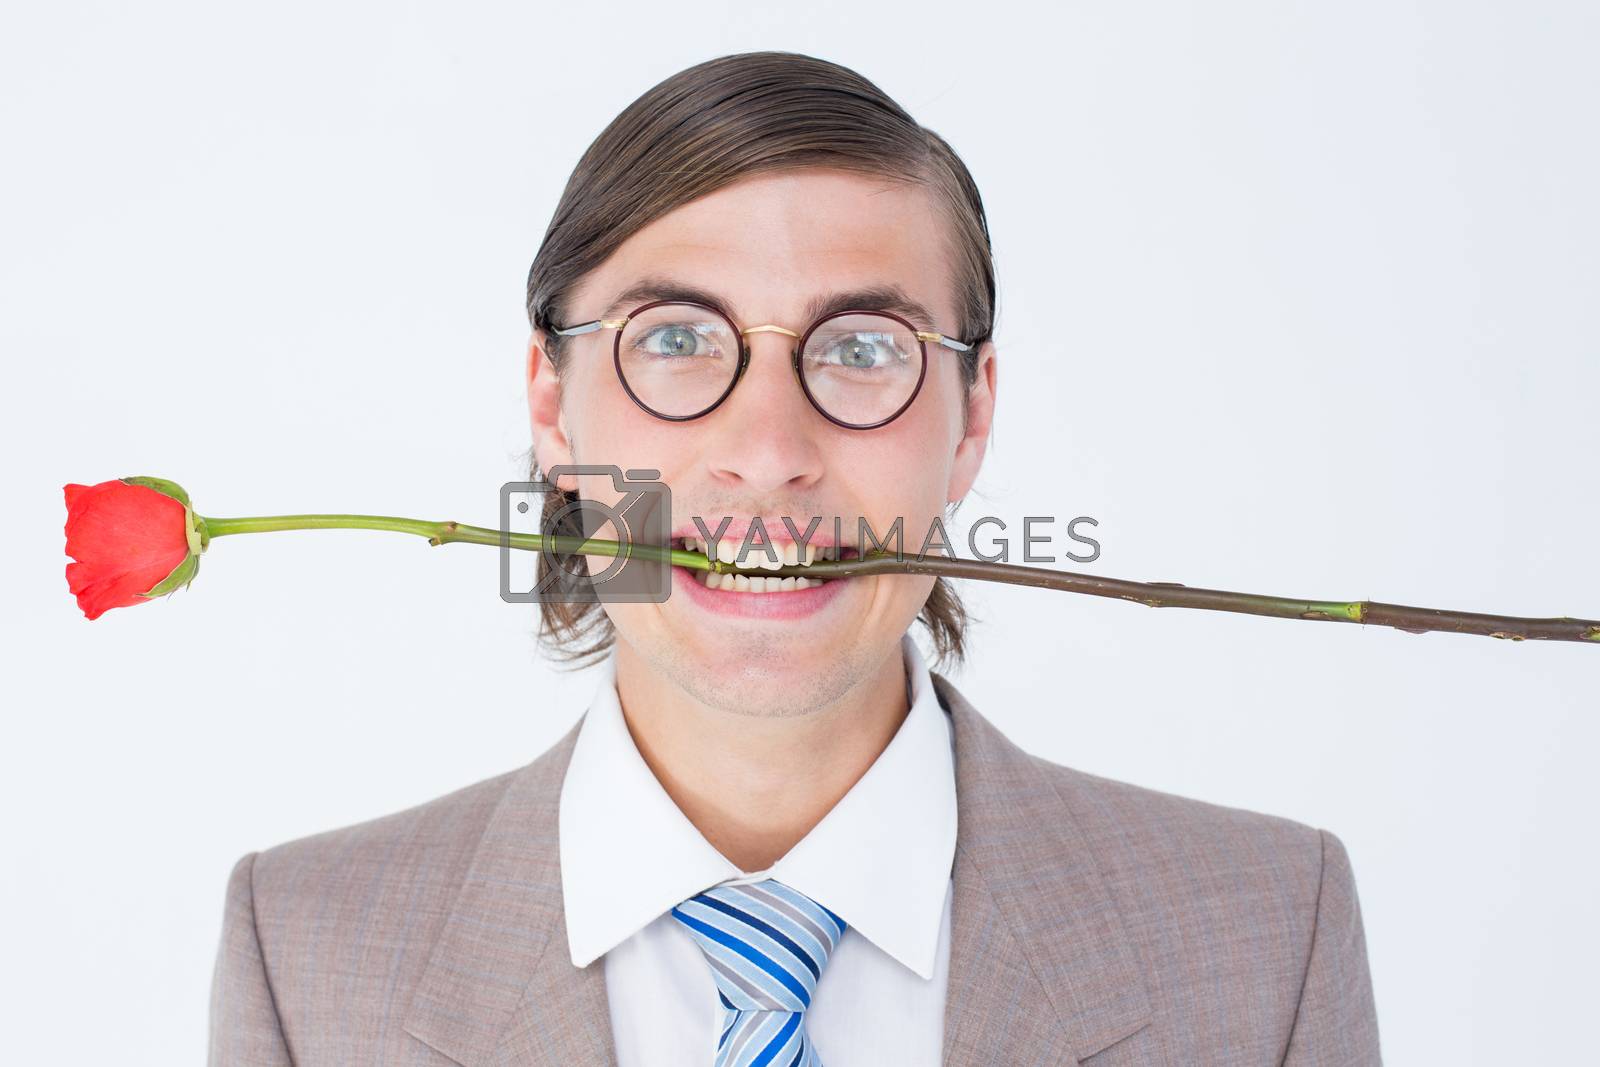 Royalty free image of Geeky businessman offering bunch of roses by Wavebreakmedia